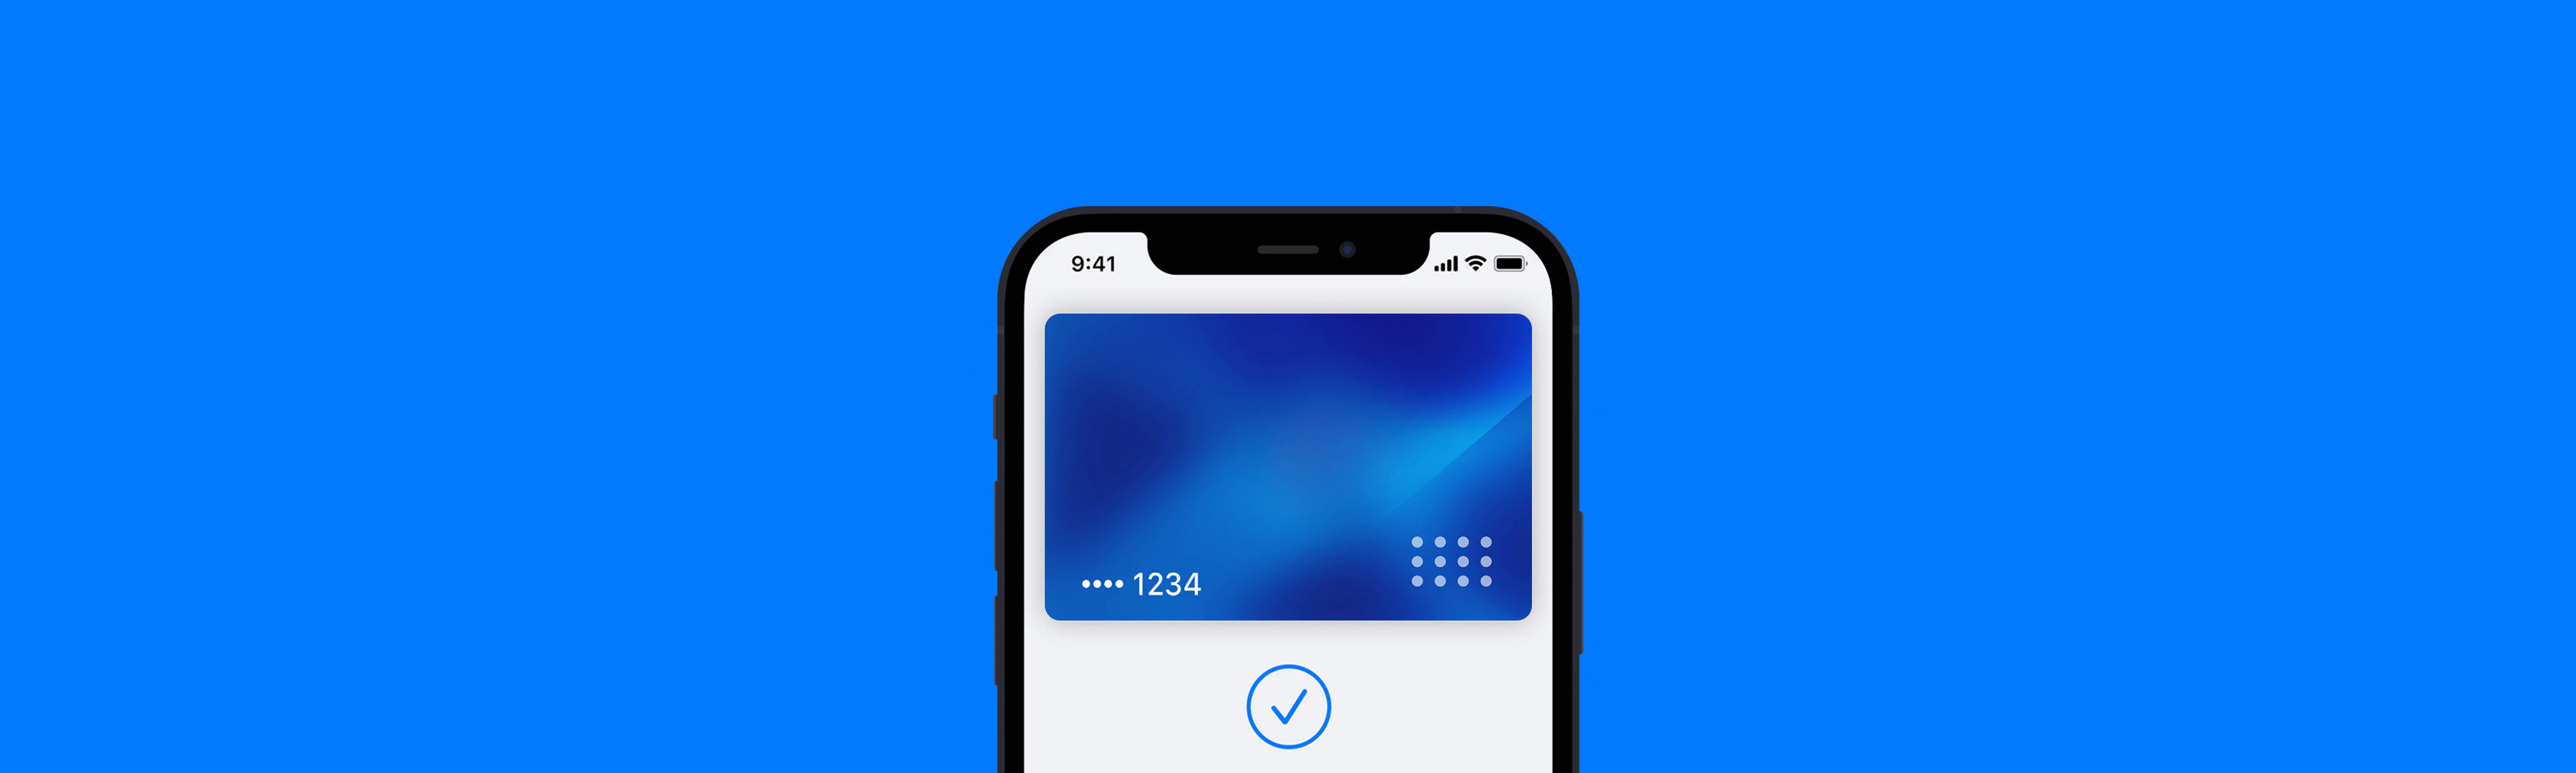 Apple Pay – Official Apple Support